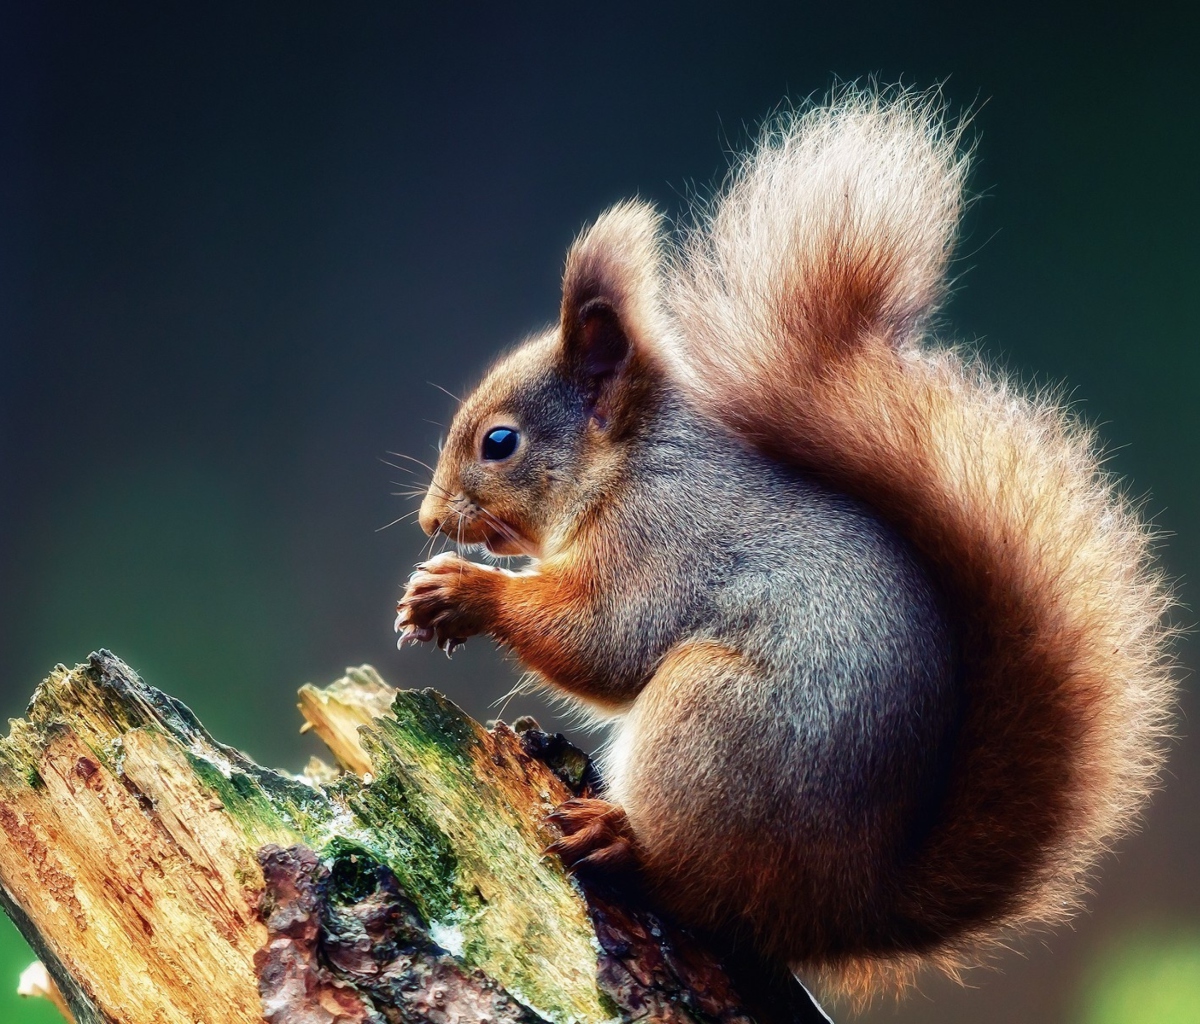 Squirrel Eating A Nut wallpaper 1200x1024